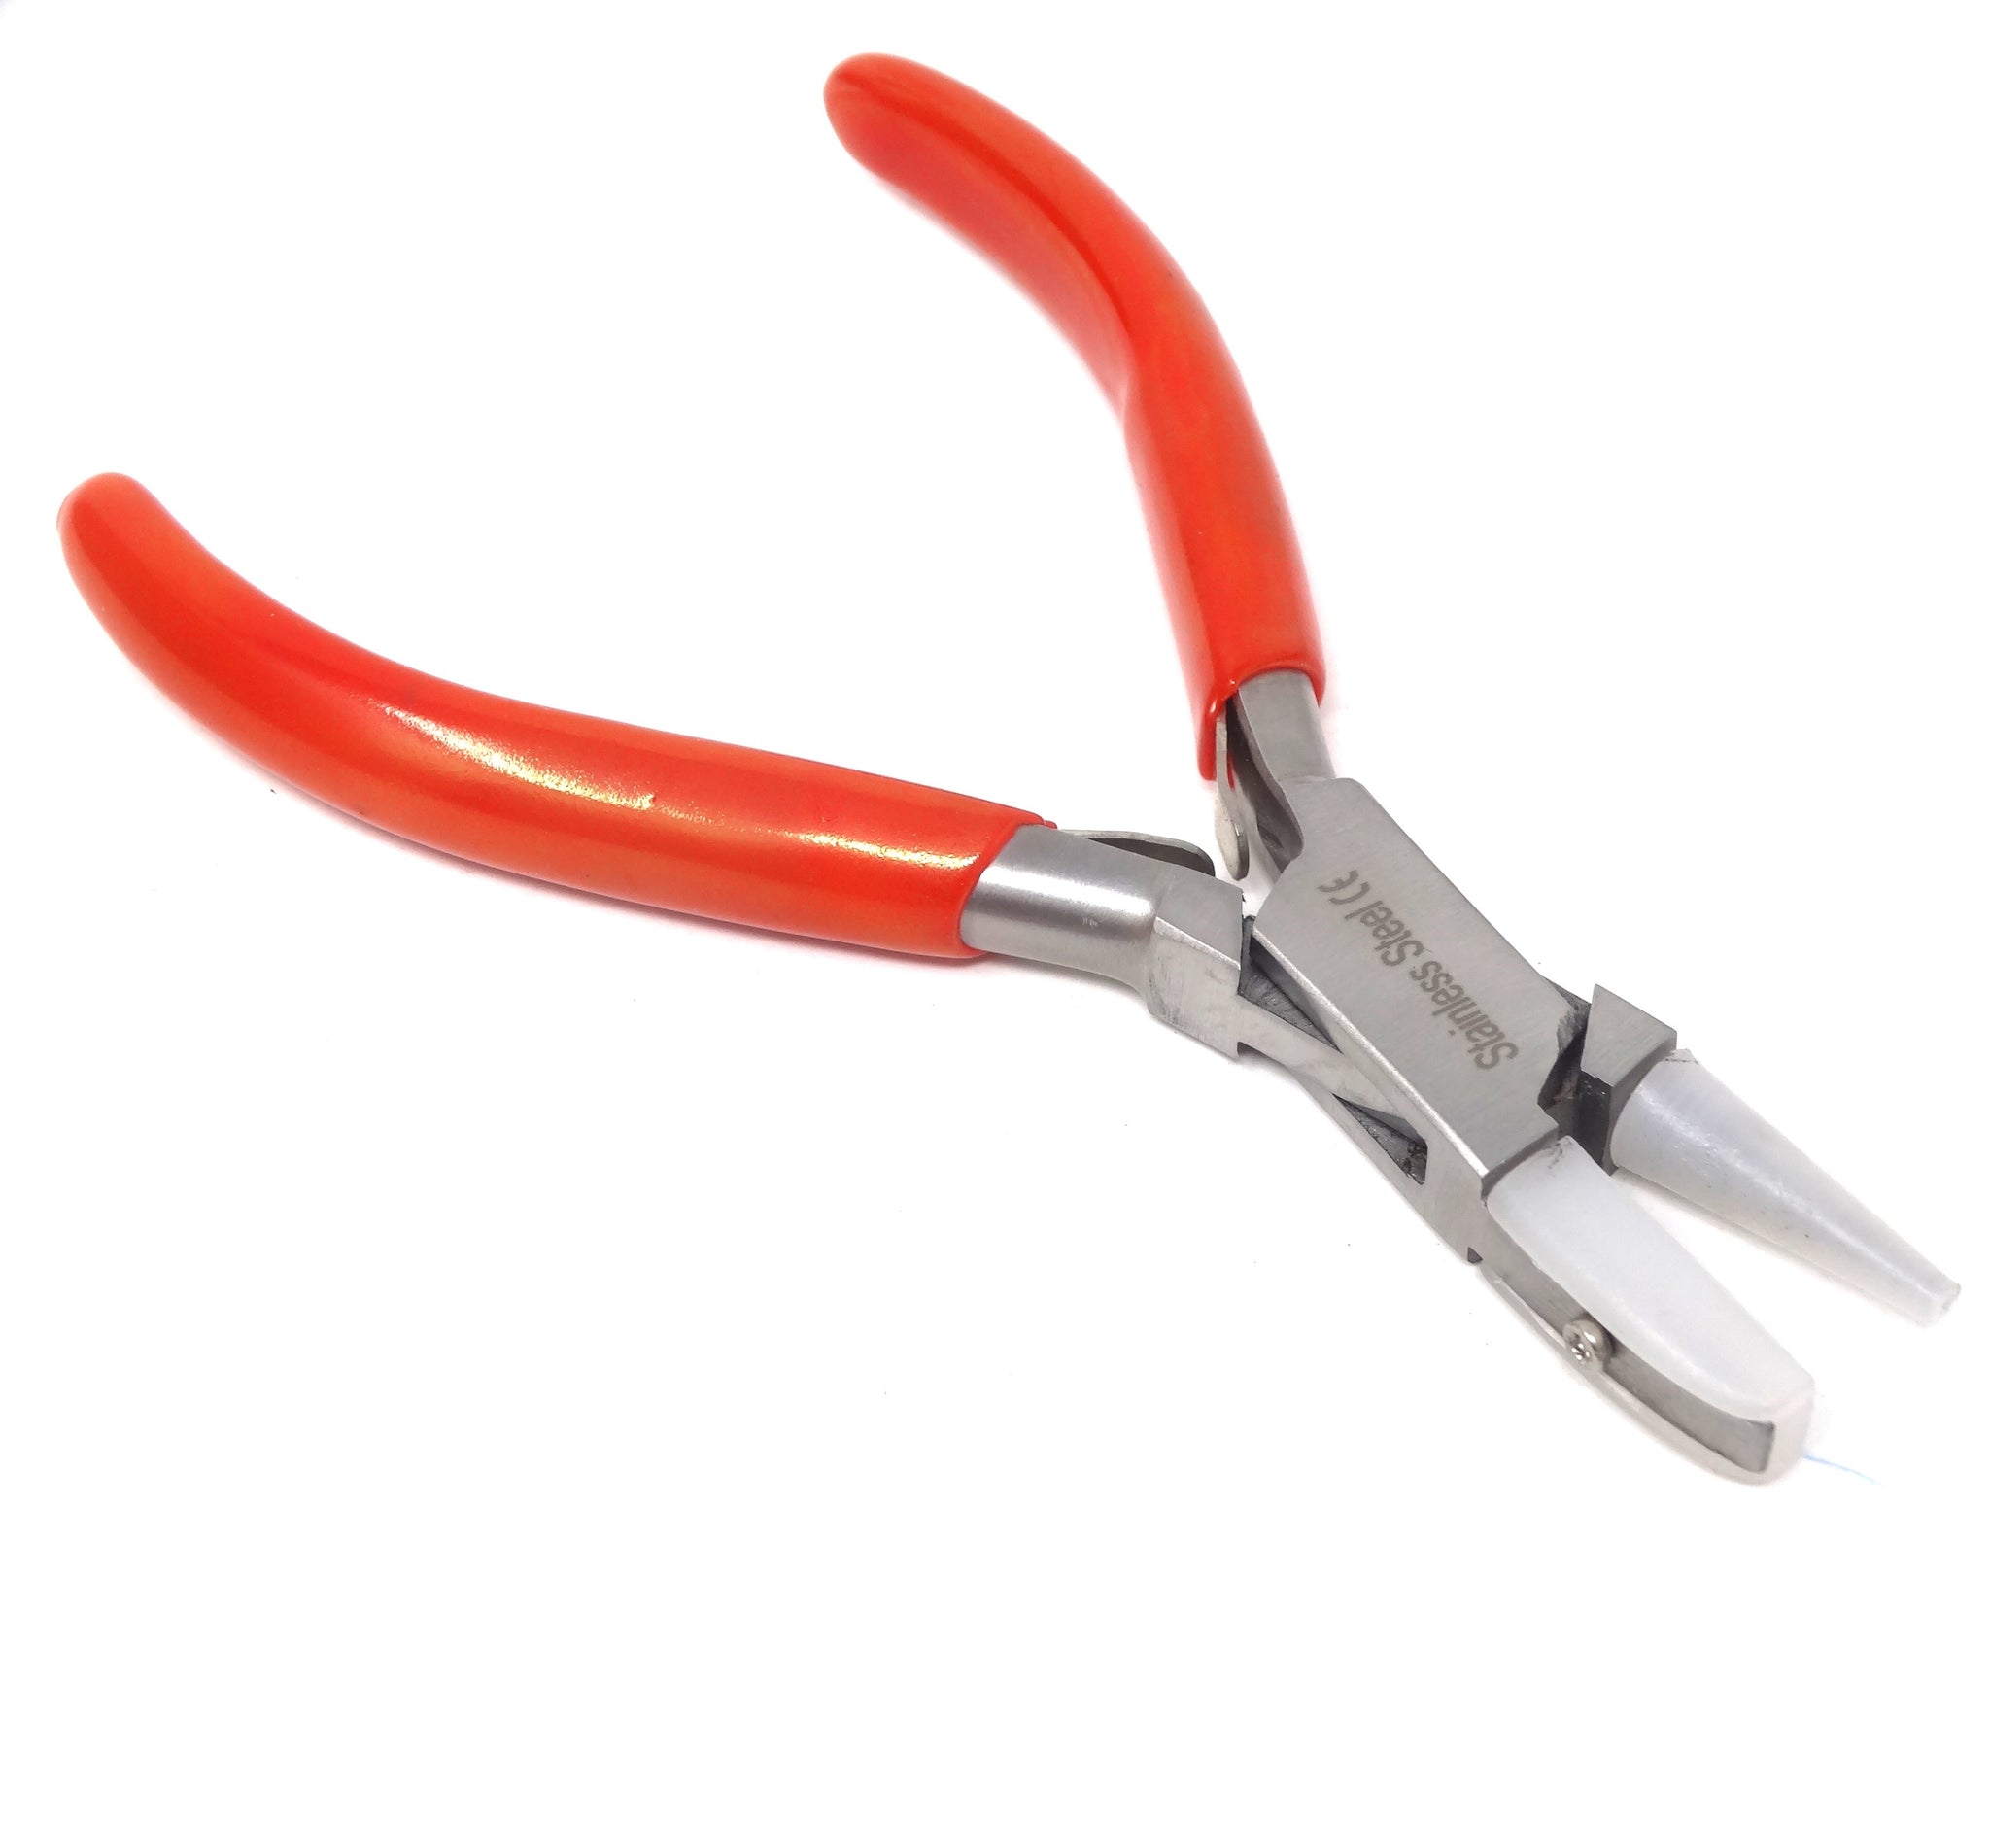 Nylon Jaw Coiling Pliers, Round and Flat Jaw, 5-1/2 Inches PLR